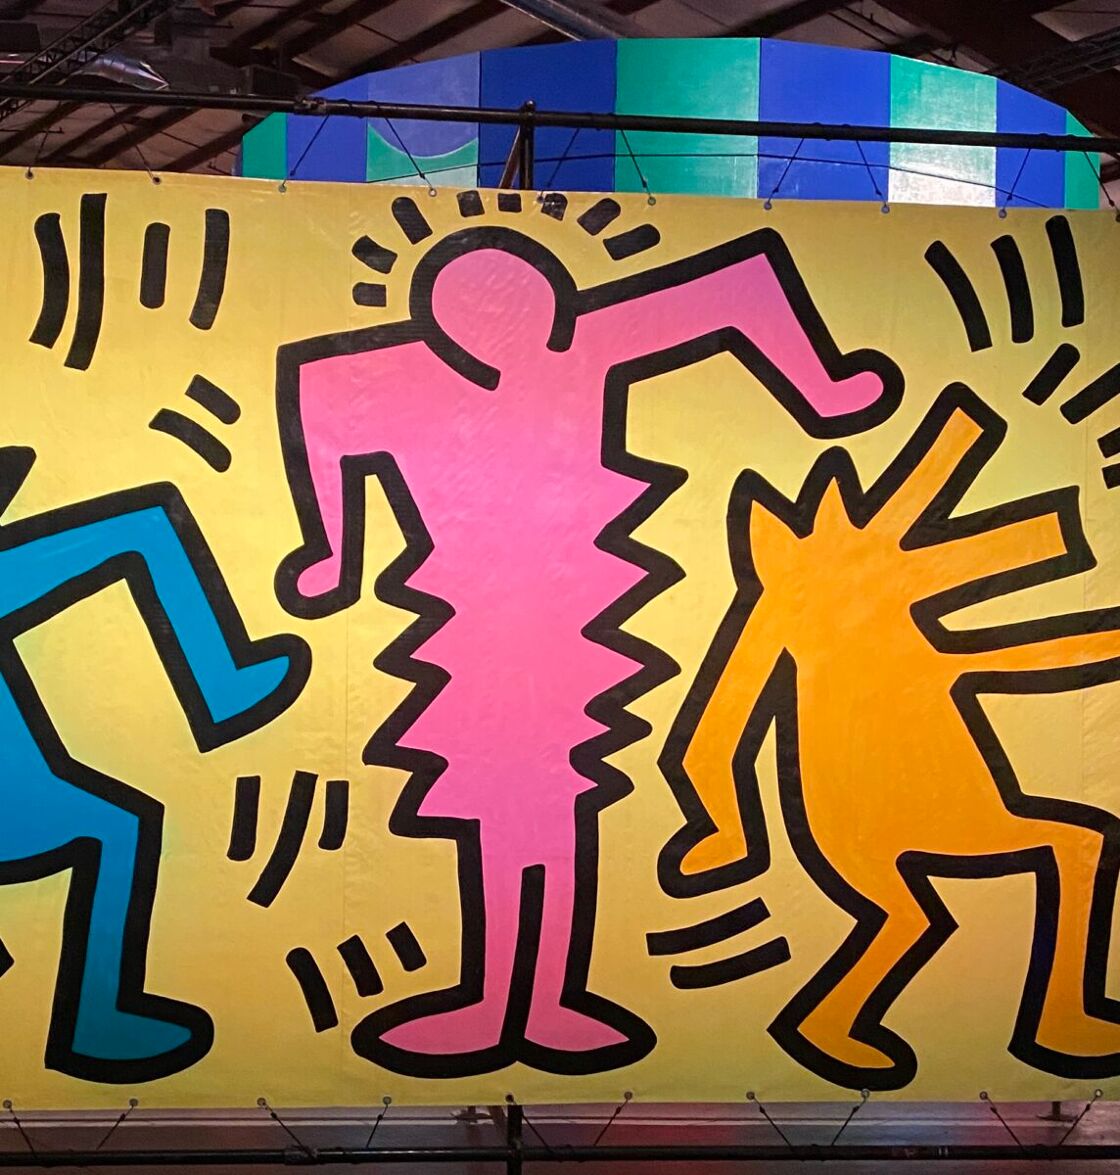 MURAL BY KEITH HARING